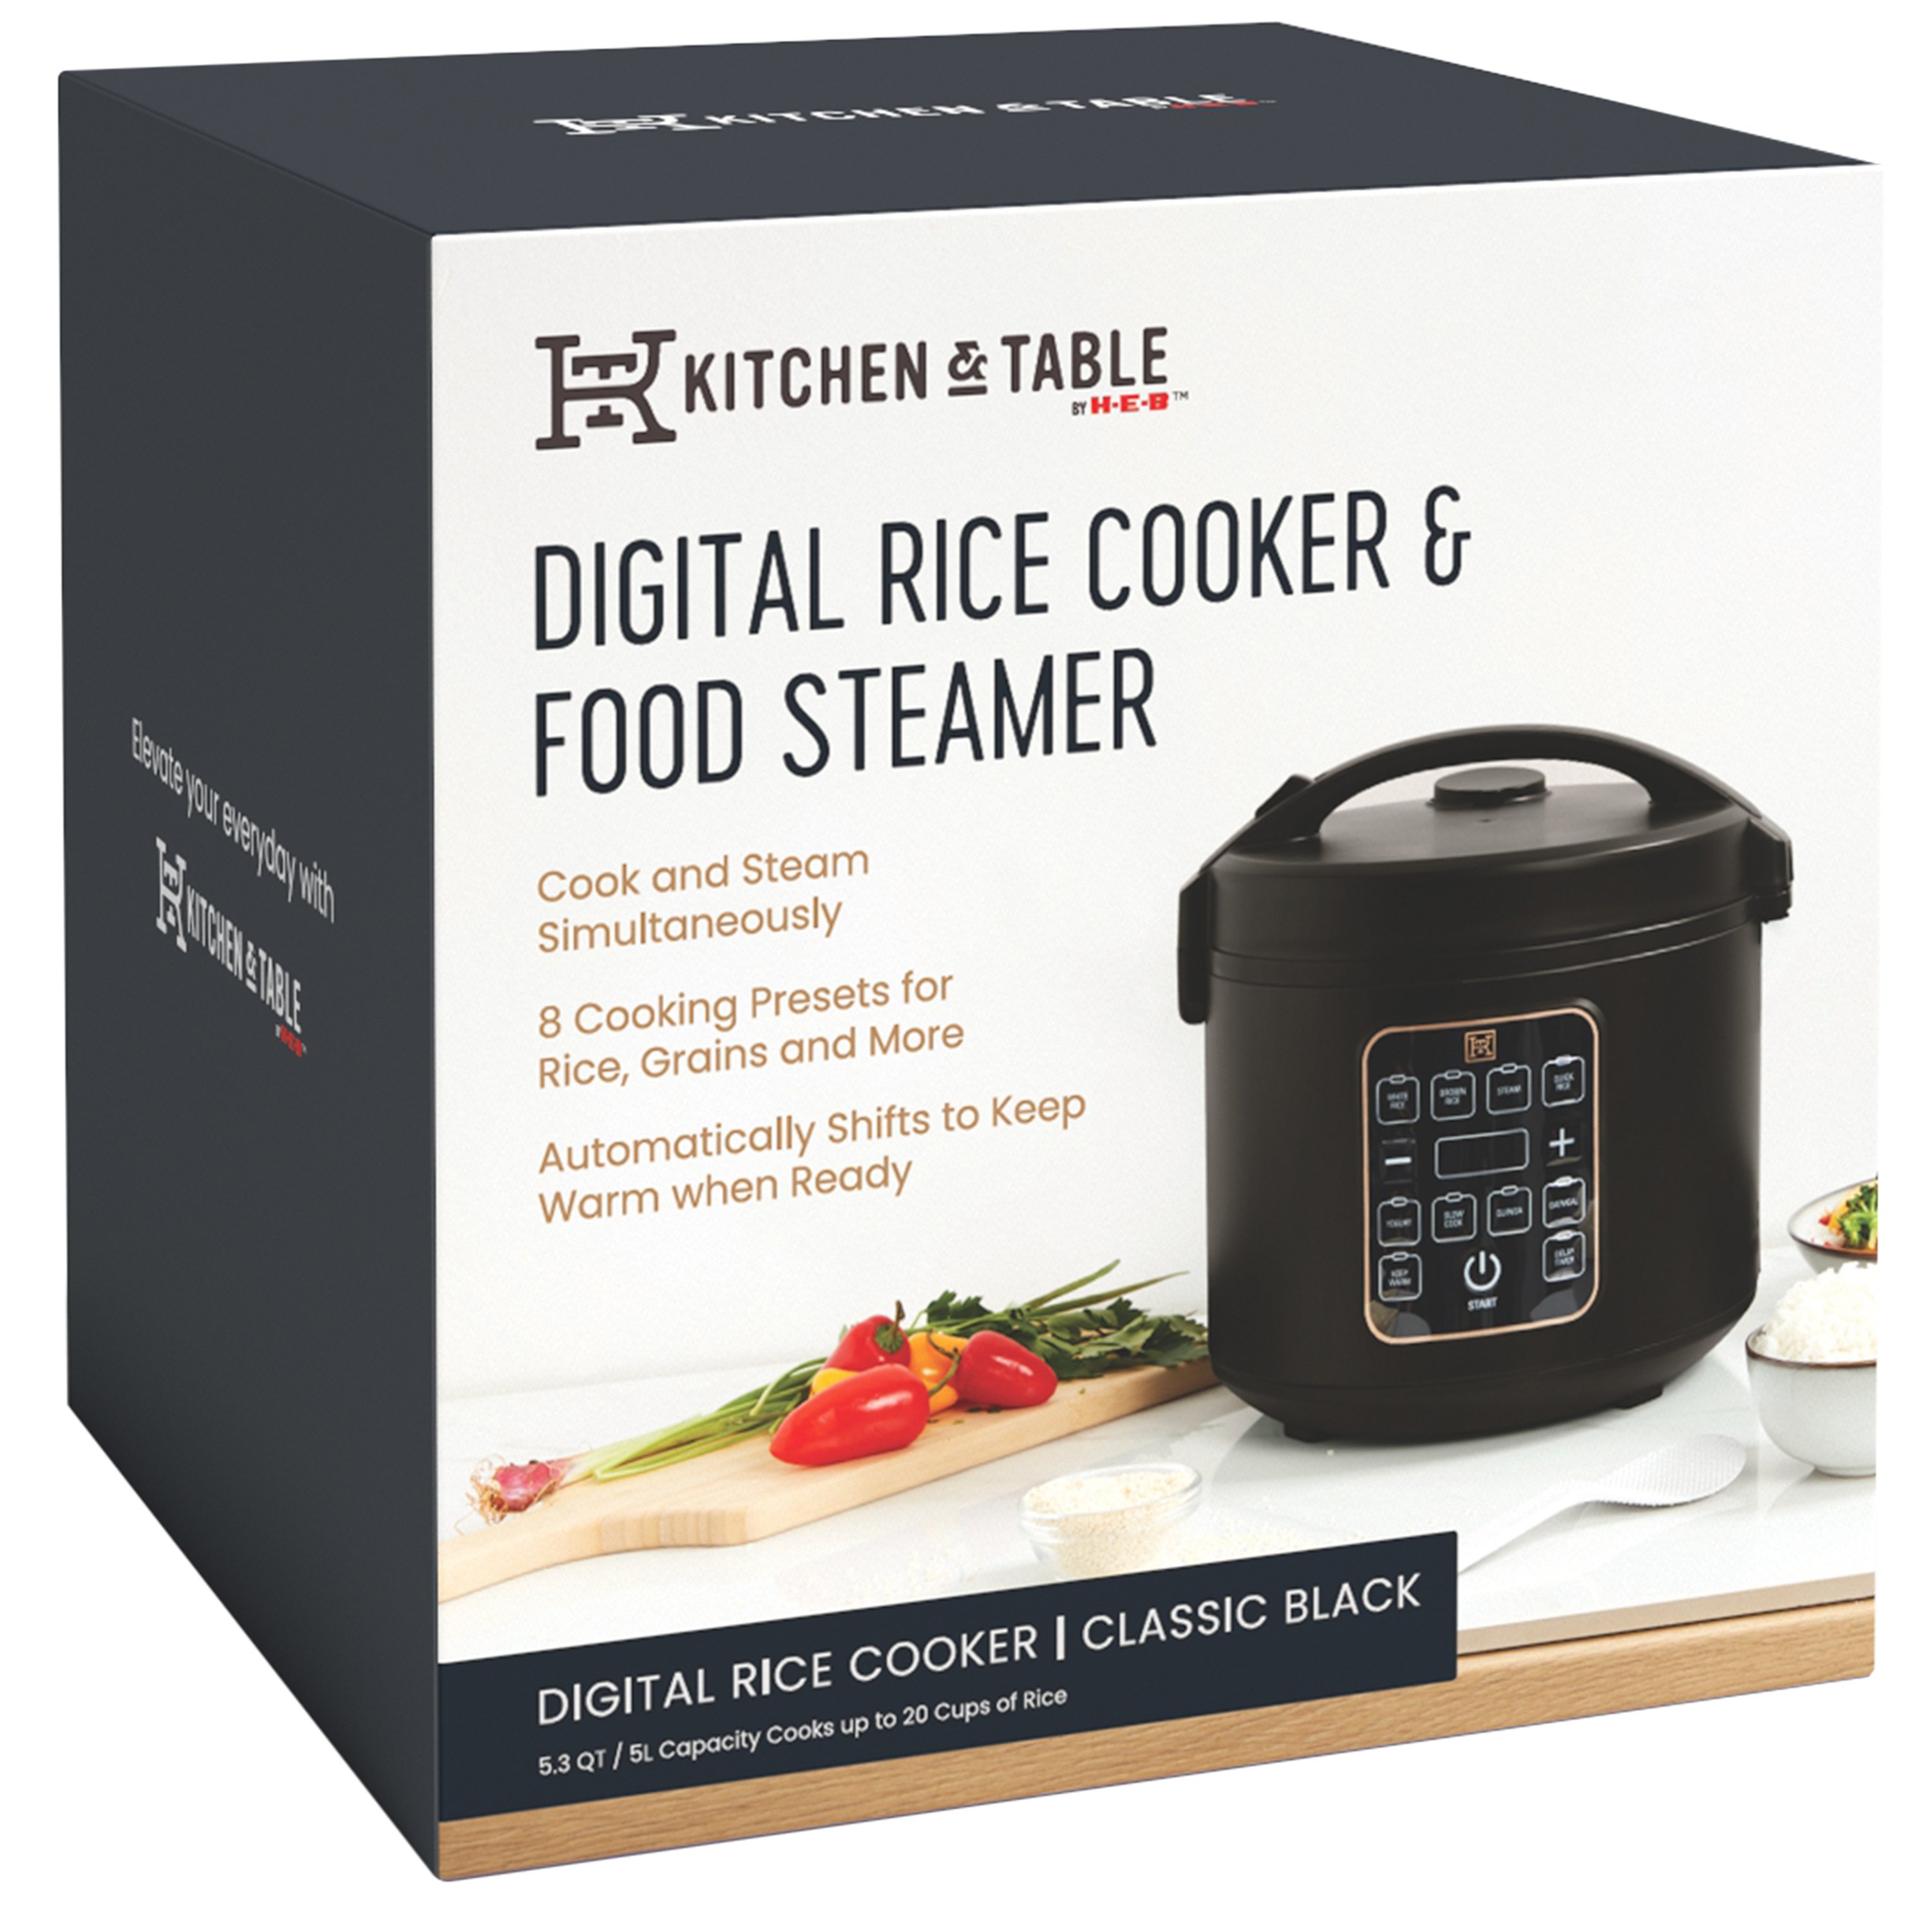 Kitchen & Table by H-E-B Digital Rice Cooker & Food Steamer